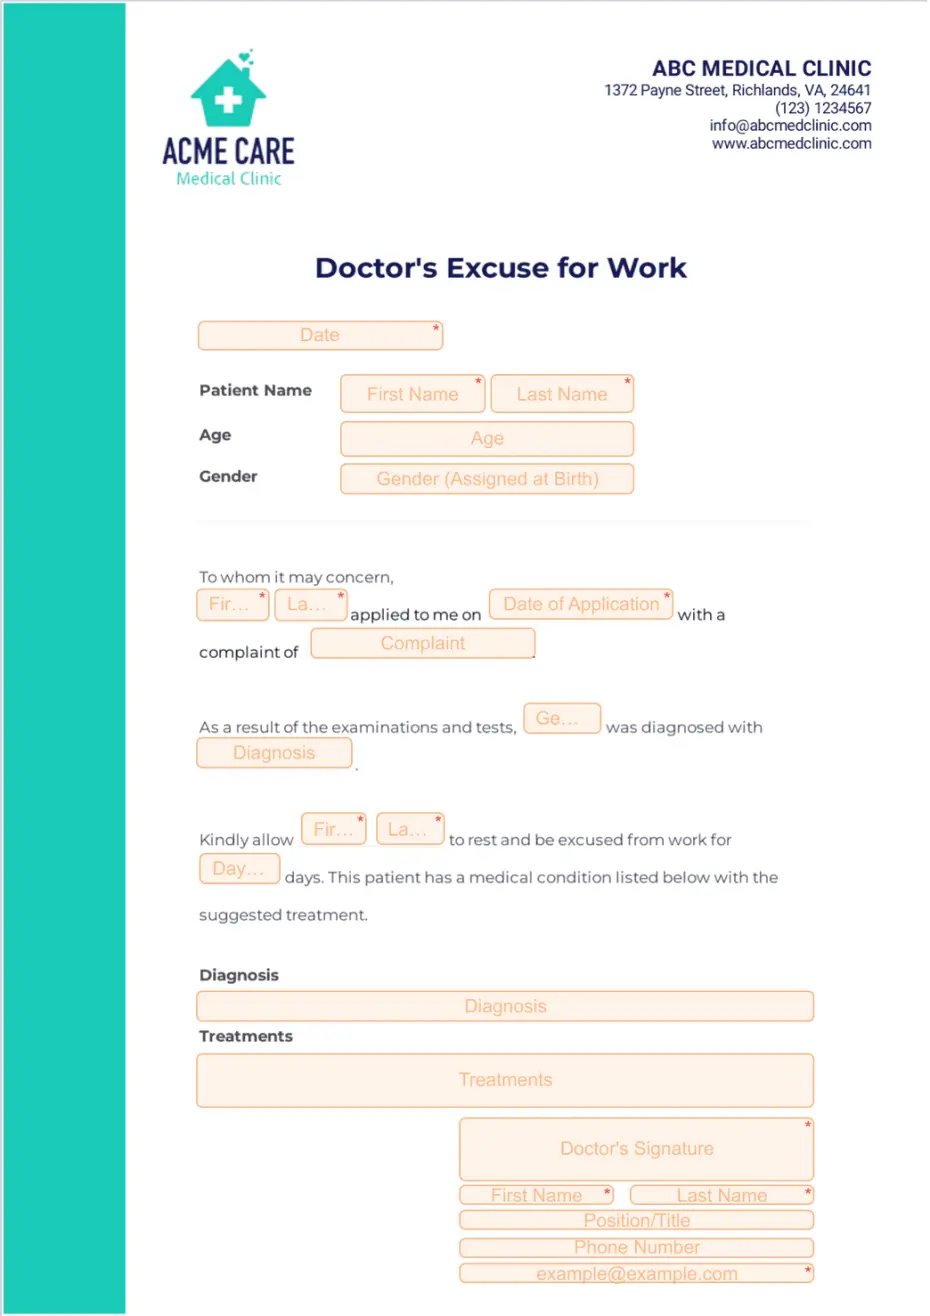 Doctors Excuse for Work